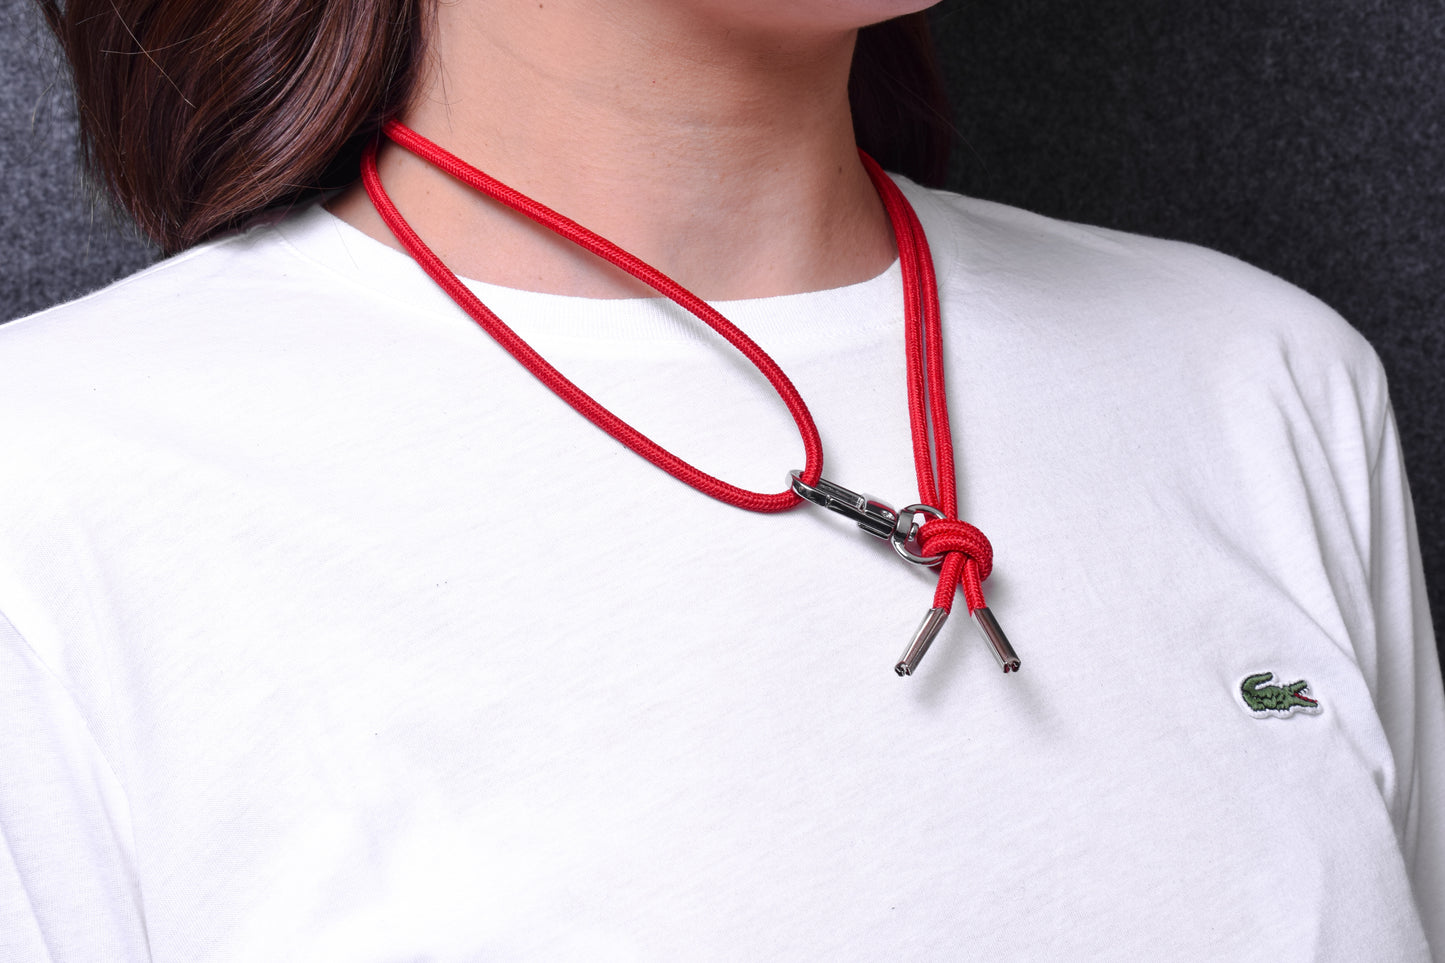 Bracelet/Crossbody/Necklace/Elastic Rope, Multicolor, Black, Red. 1 Swivel Carabiner and 2 Silver-plated Terminals.- P27